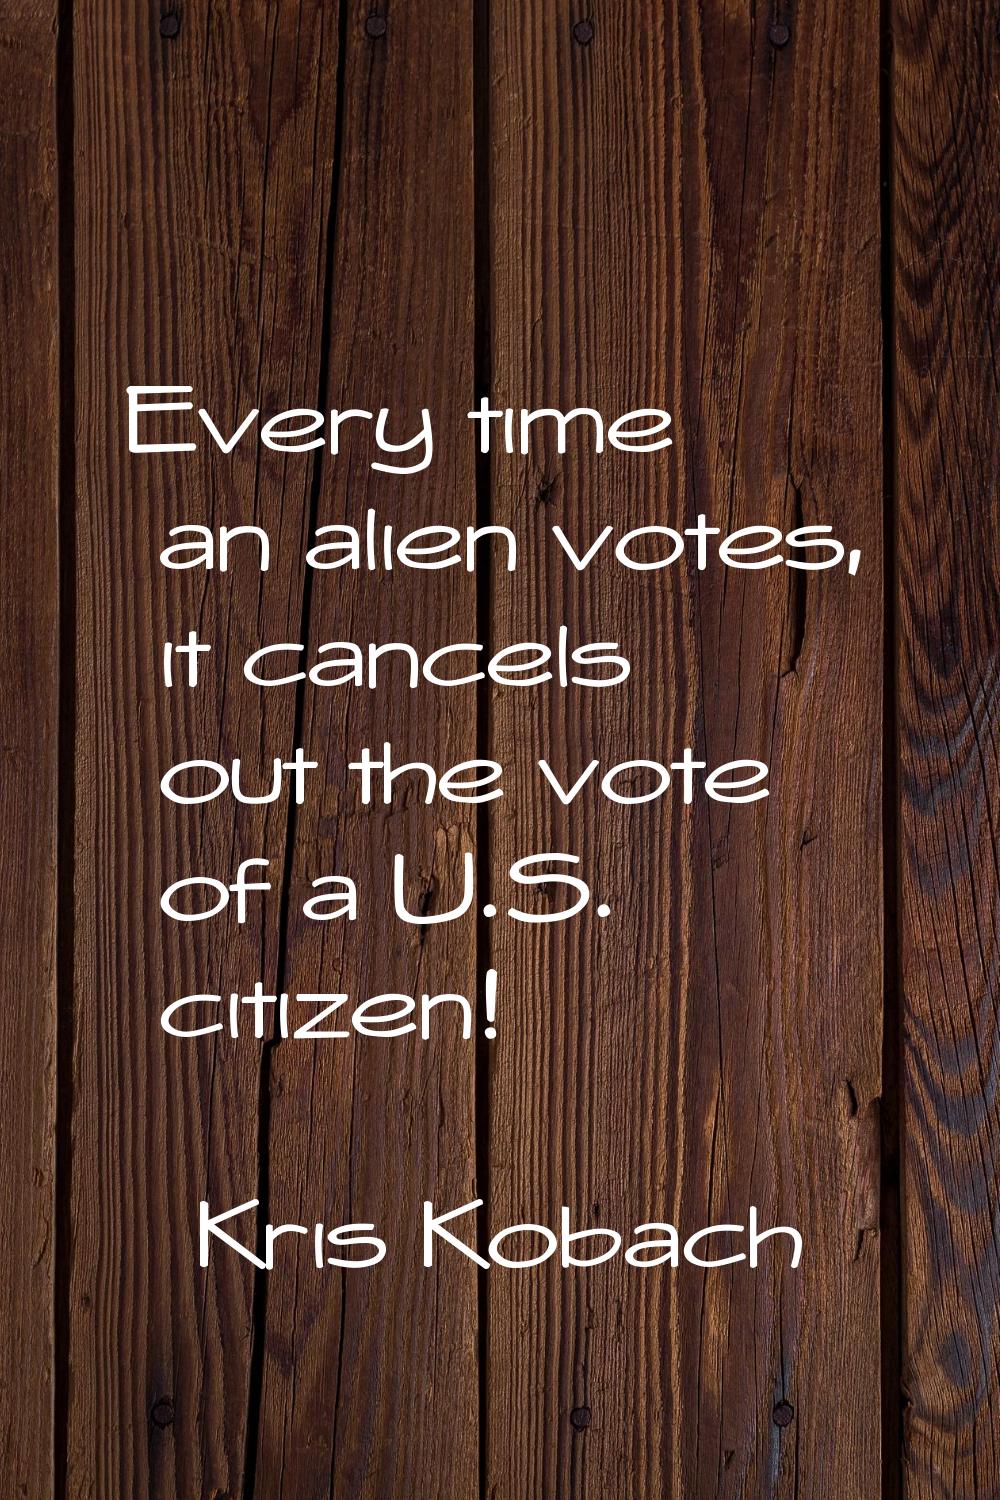 Every time an alien votes, it cancels out the vote of a U.S. citizen!